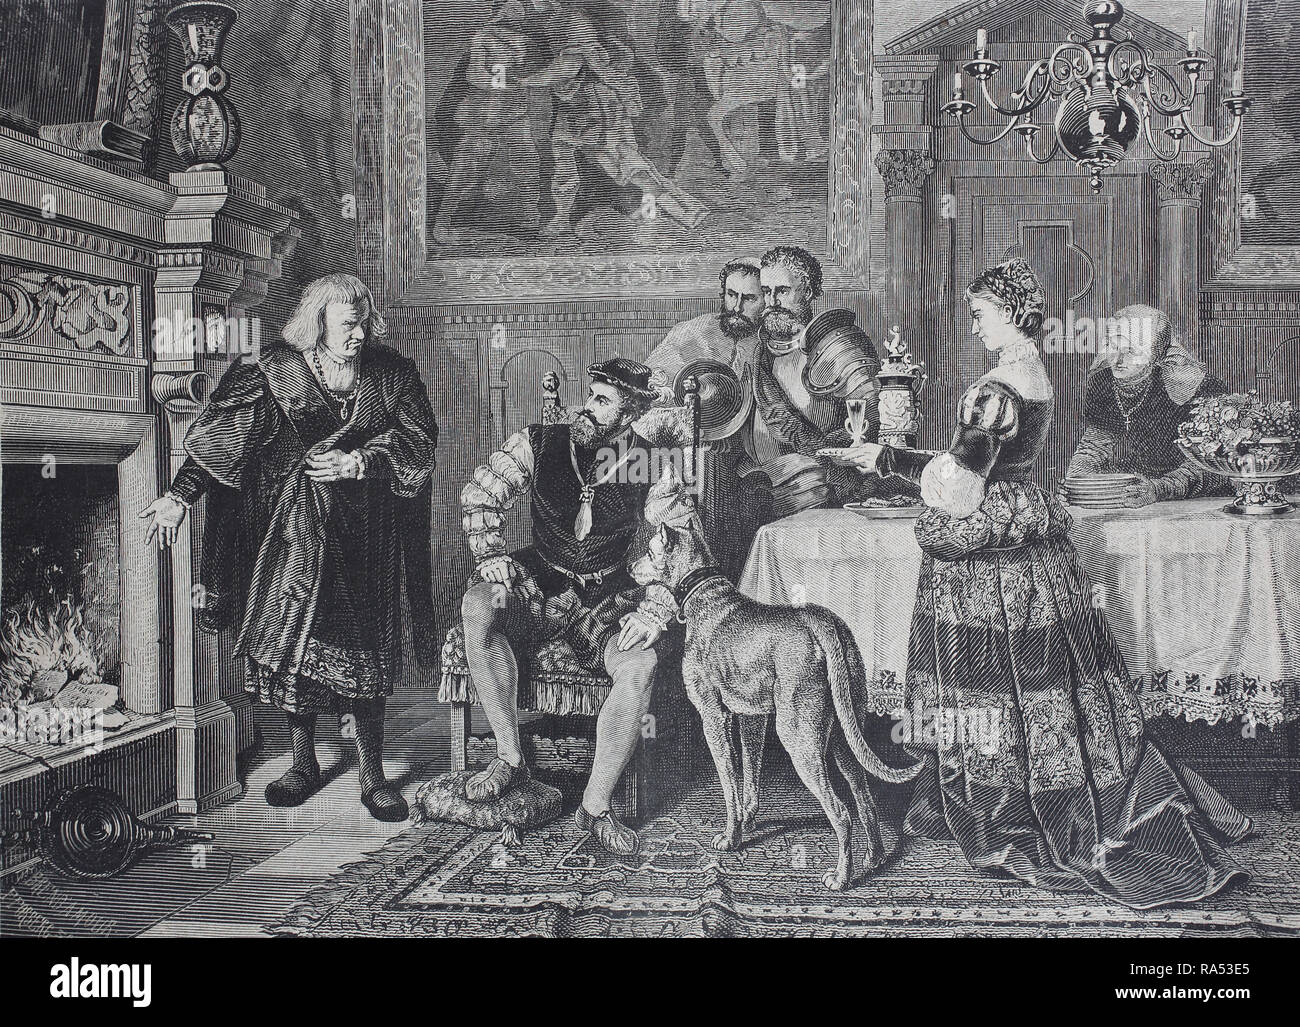 Digital improved reproduction, Emperor Charles V. visiting Anton Fugger at Augsburg, Germany, Anton Fugger, 1493 to 1560, a German merchant, Kaiser Karl V. bei Anton Fugger in Augsburg, Deutschland, from an original print from the year 1865, 19th century, Stock Photo